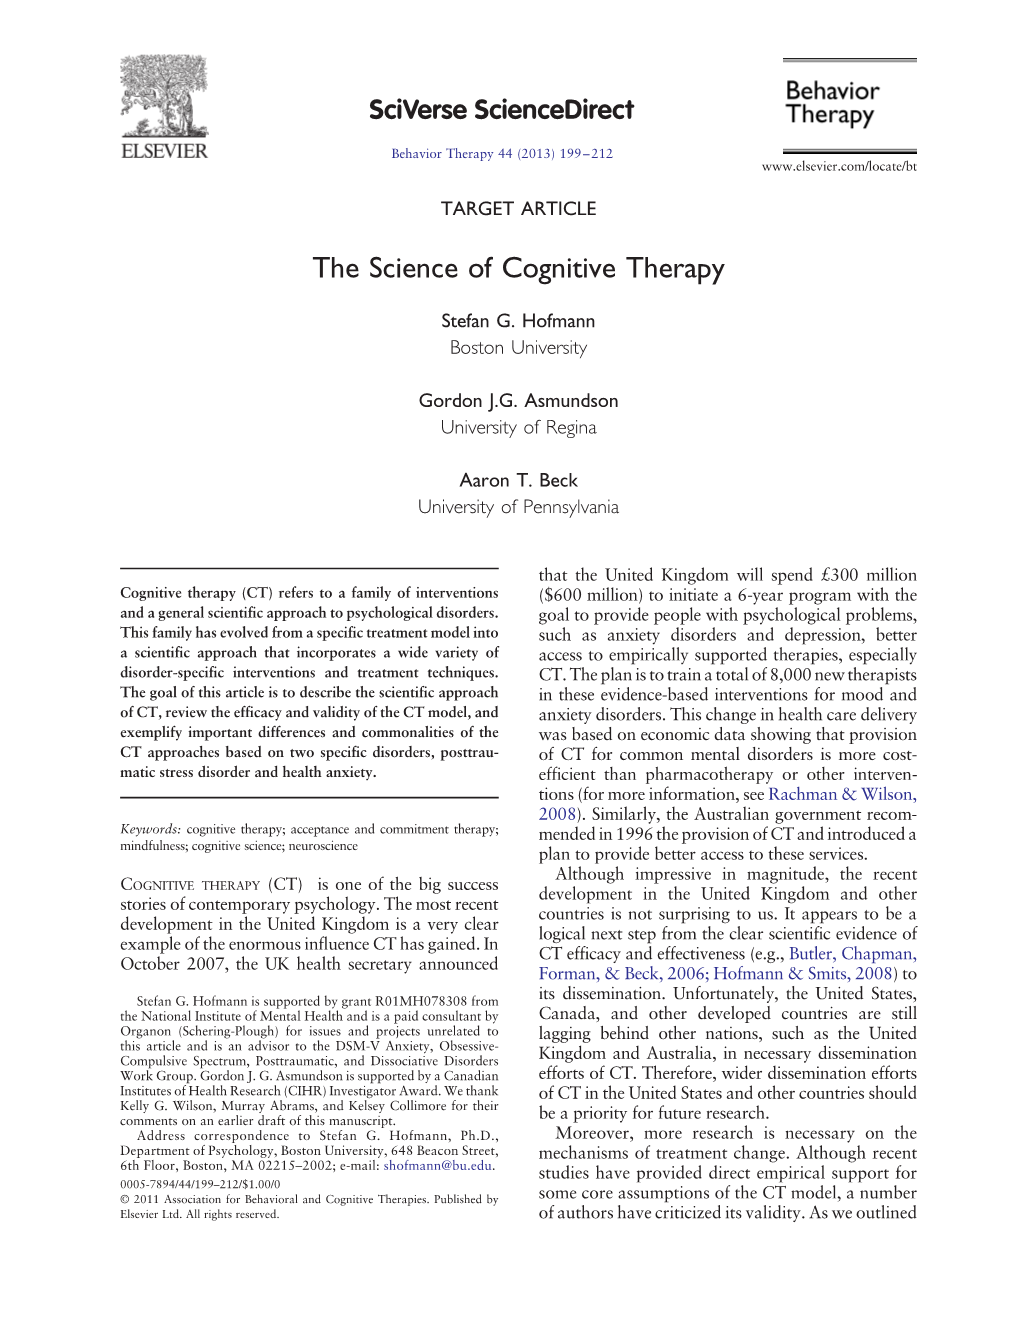 The Science of Cognitive Therapy